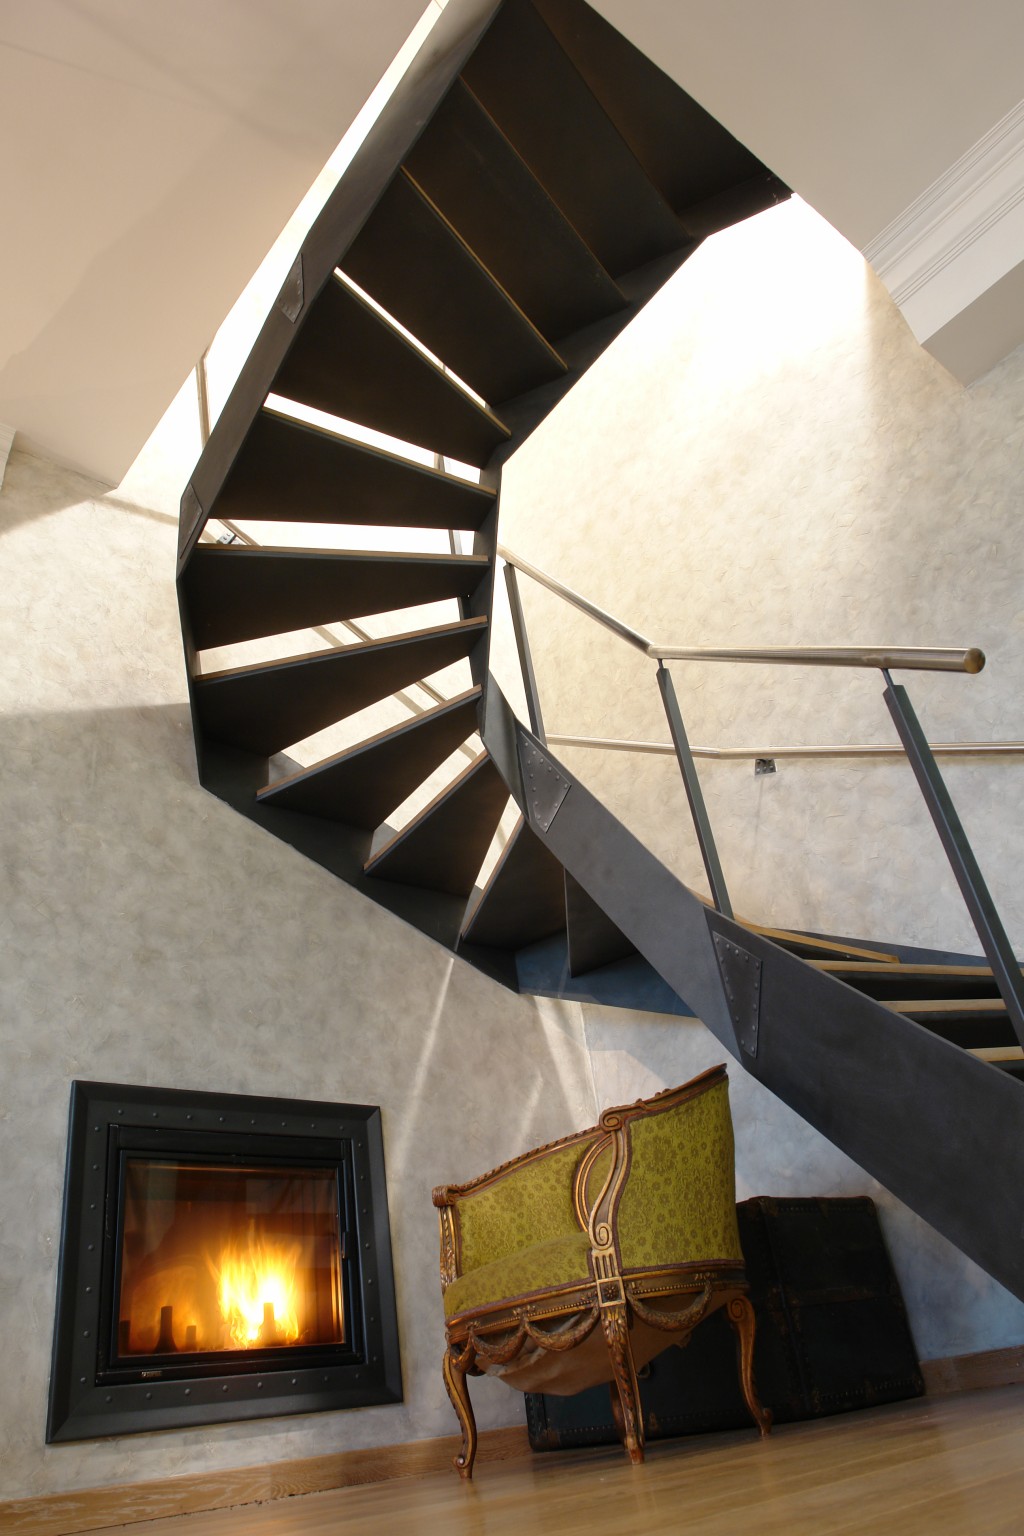 Amazing stairs and fireplace